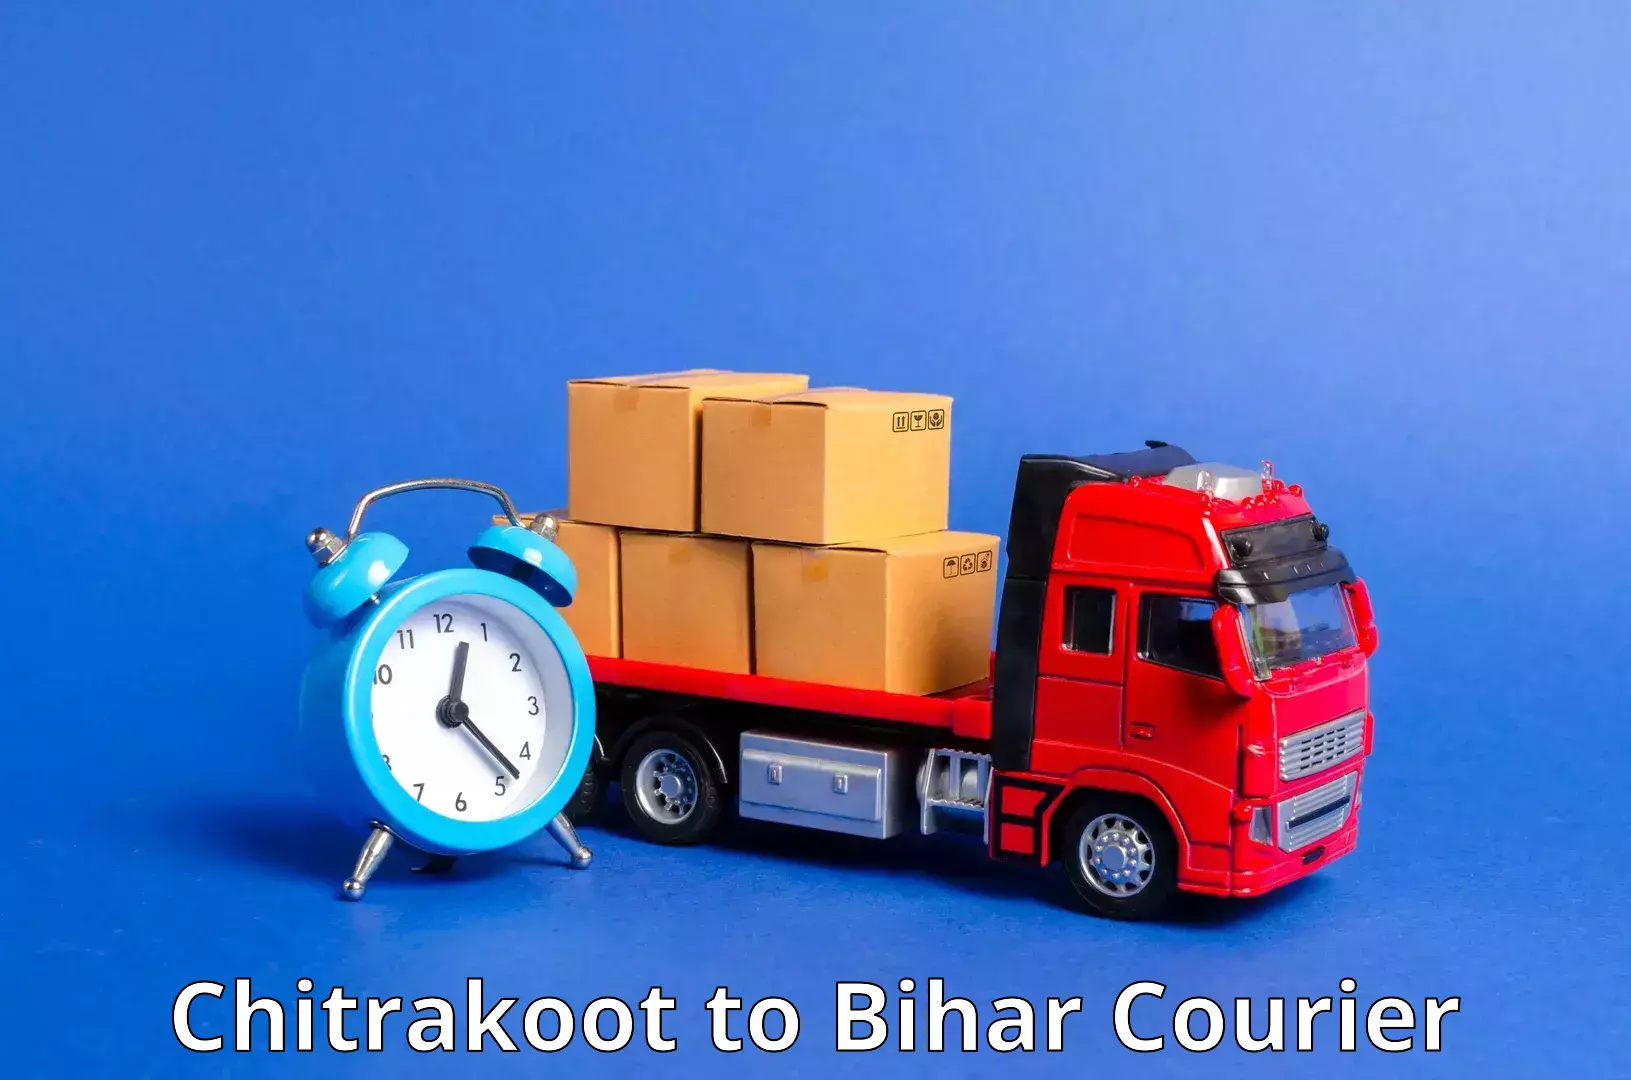 Multi-national courier services Chitrakoot to Baniapur